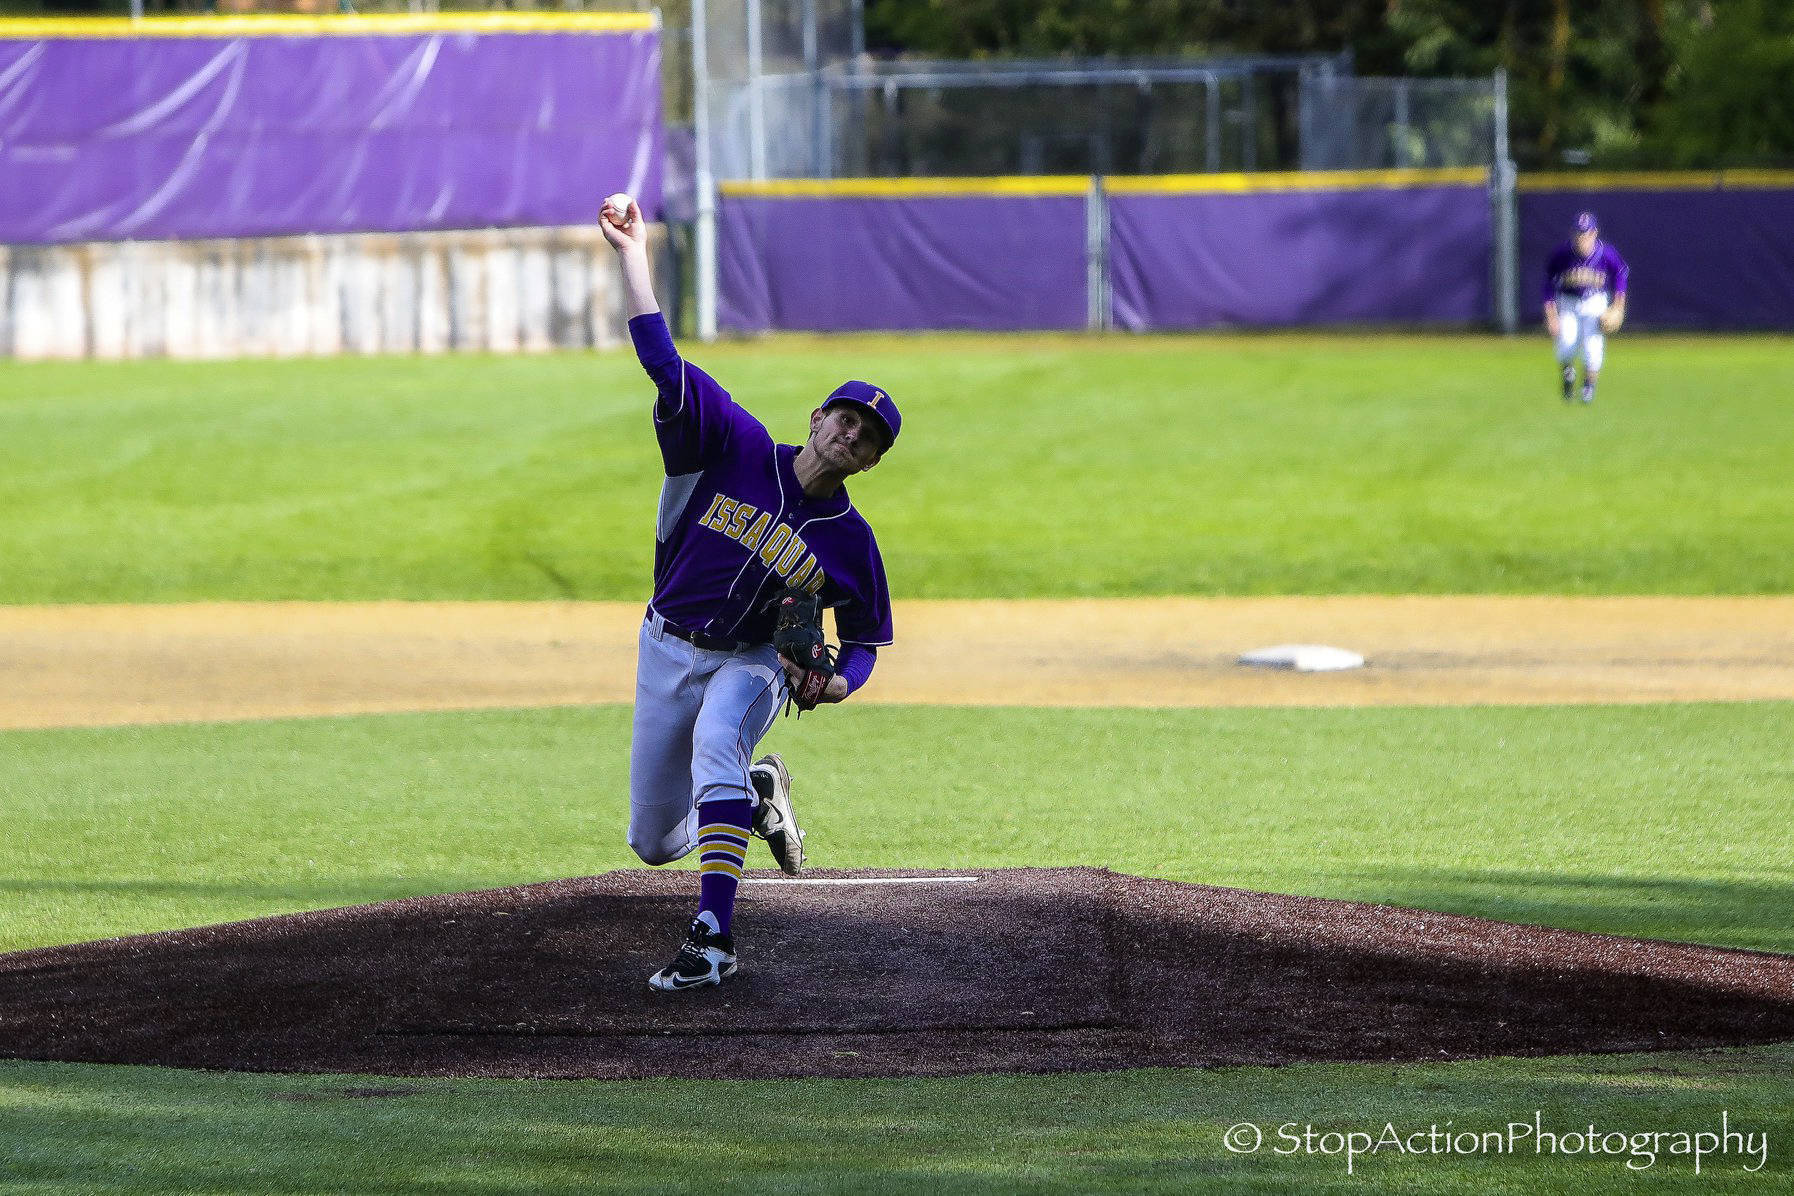 Issaquah Eagles senior ace pitcher Tyler Odegard allowed just one hit in seven innings of work against the Inglemoor Vikings on April 12. Issaquah defeated Inglemoor, 2-0. Photo courtesy of Don Borin/Stop Action Photography